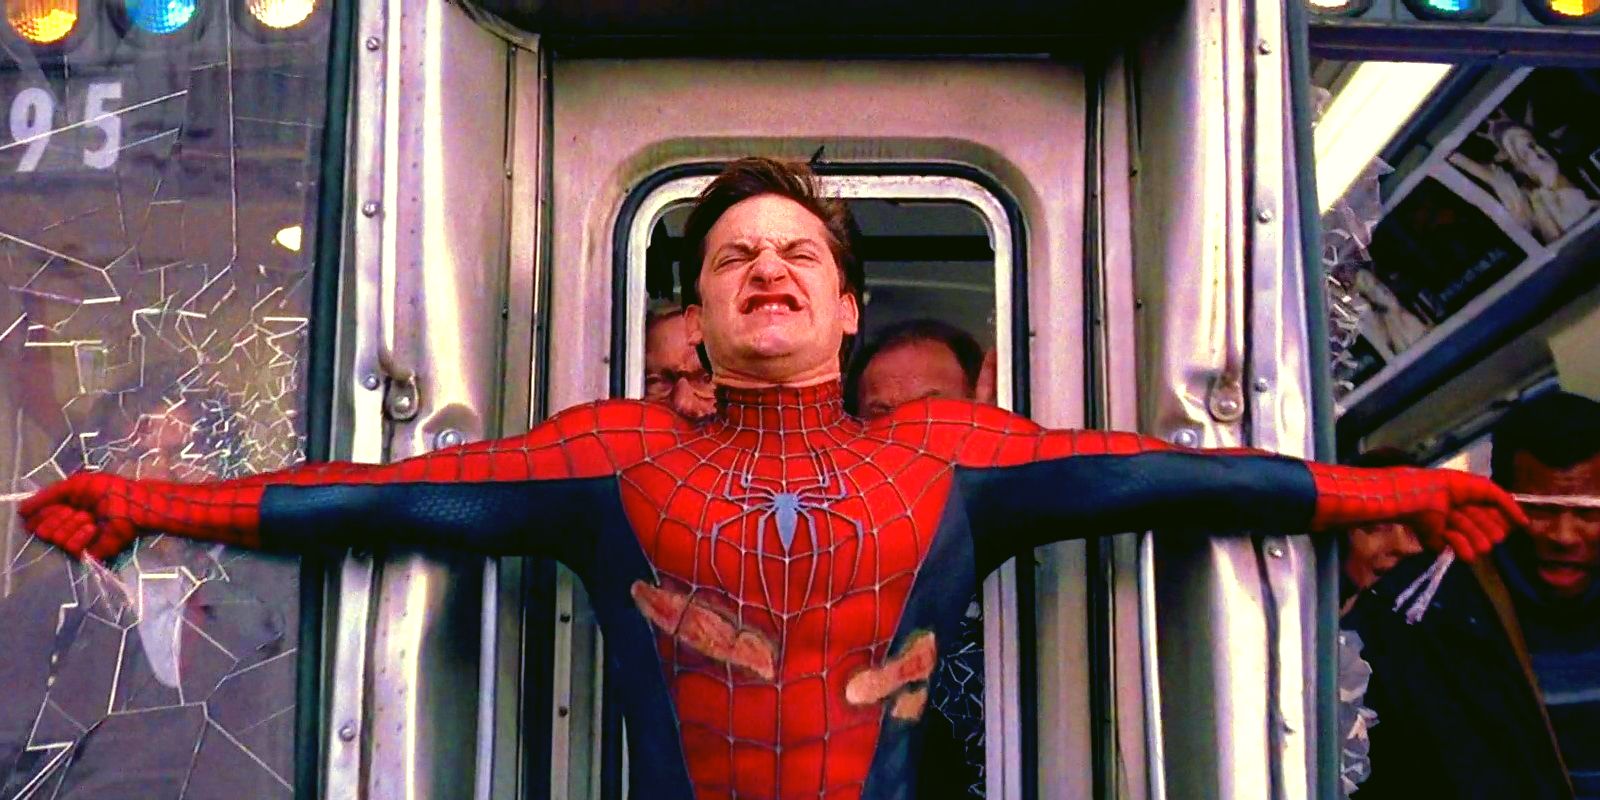 Famous Spider-Man Movie Sequences Reimagined As R-Rated Scenes